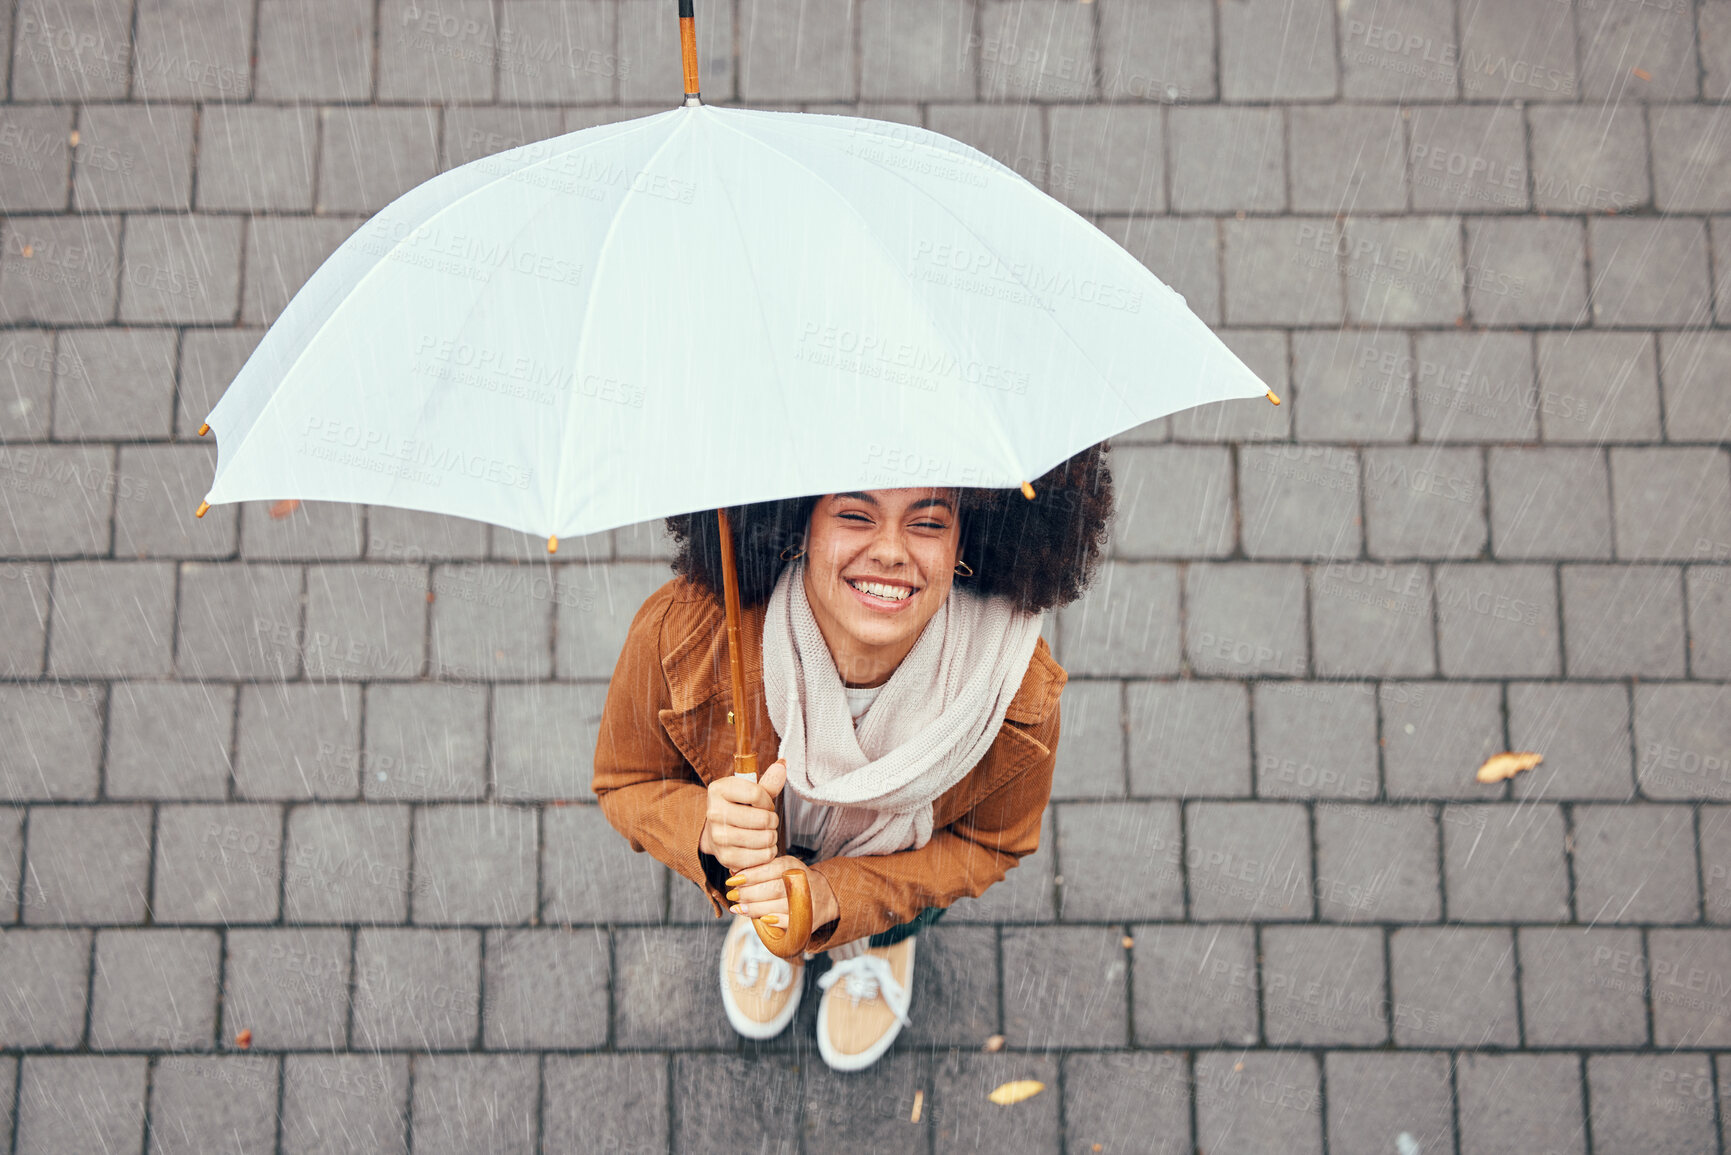 Buy stock photo Happy, relax and girl with rain umbrella enjoying outdoor, urban and winter weather with excited smile. Happiness, peace and wellness of black woman with afro standing in rainy city top view.

